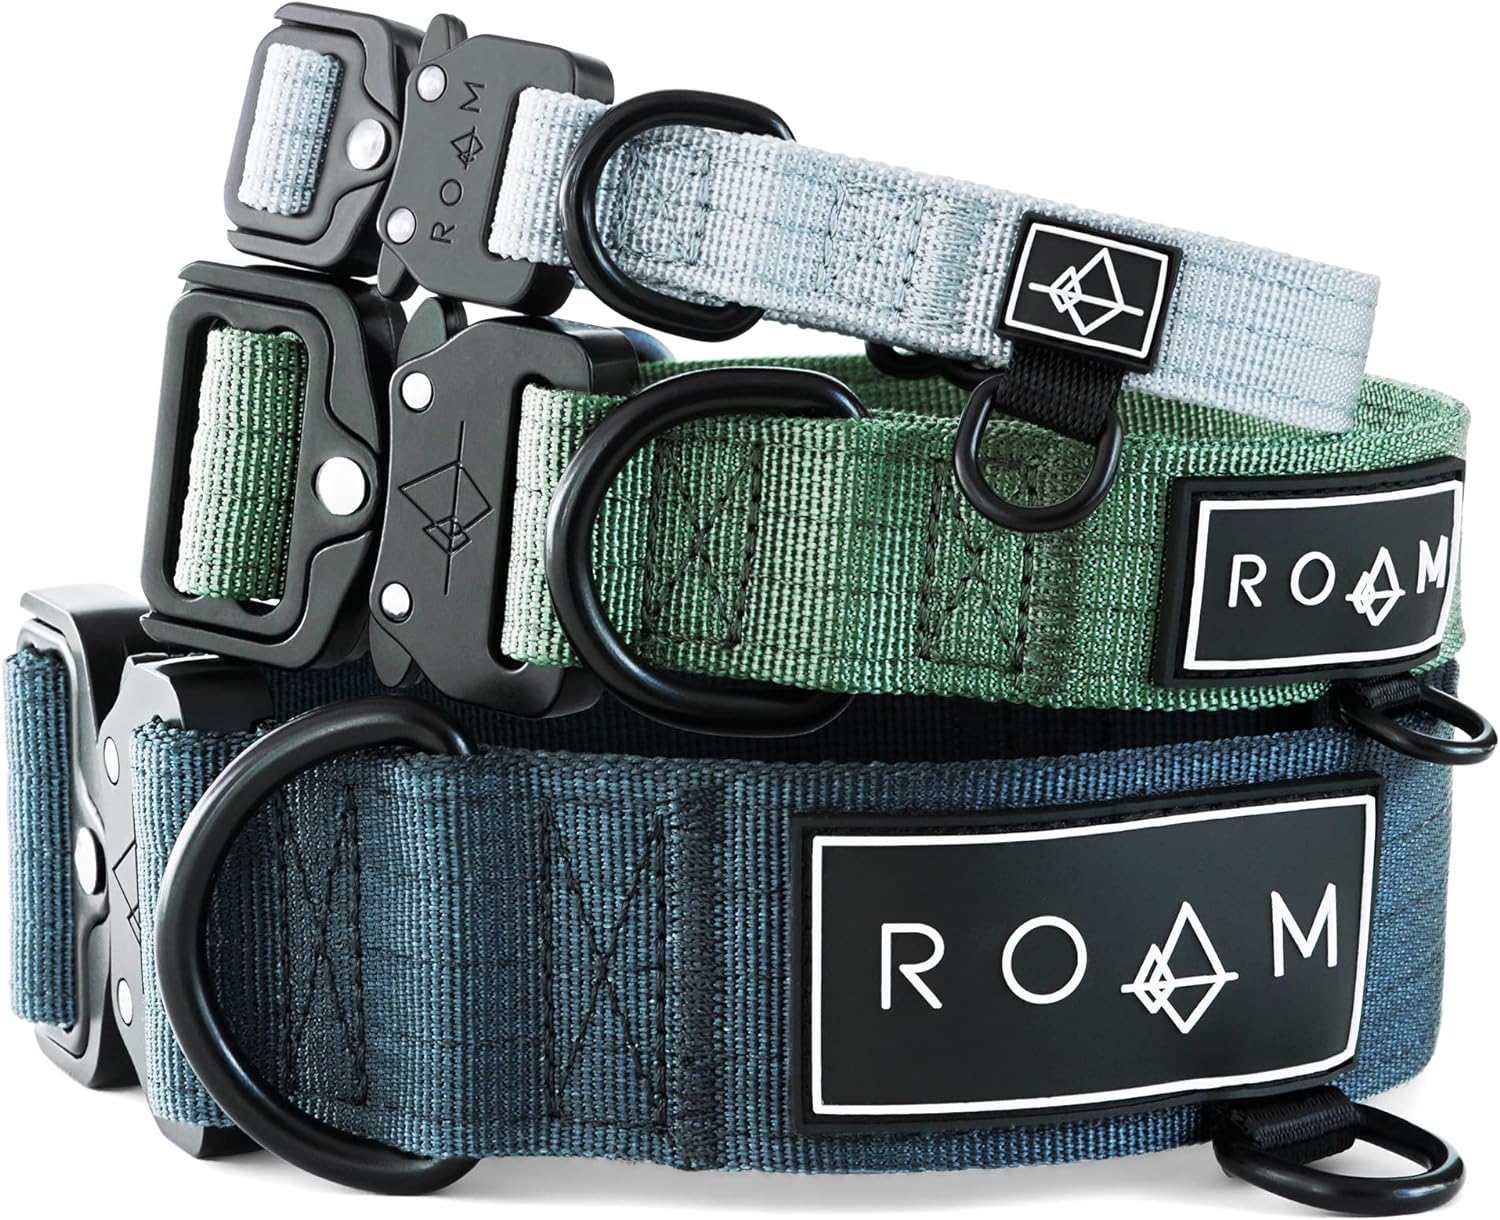 Made to ROAM Premium Dog Collar - Adjustable Heavy Duty Nylon Collar with Quick-Release Metal Buckle (Vermont Weekends, Size 3)